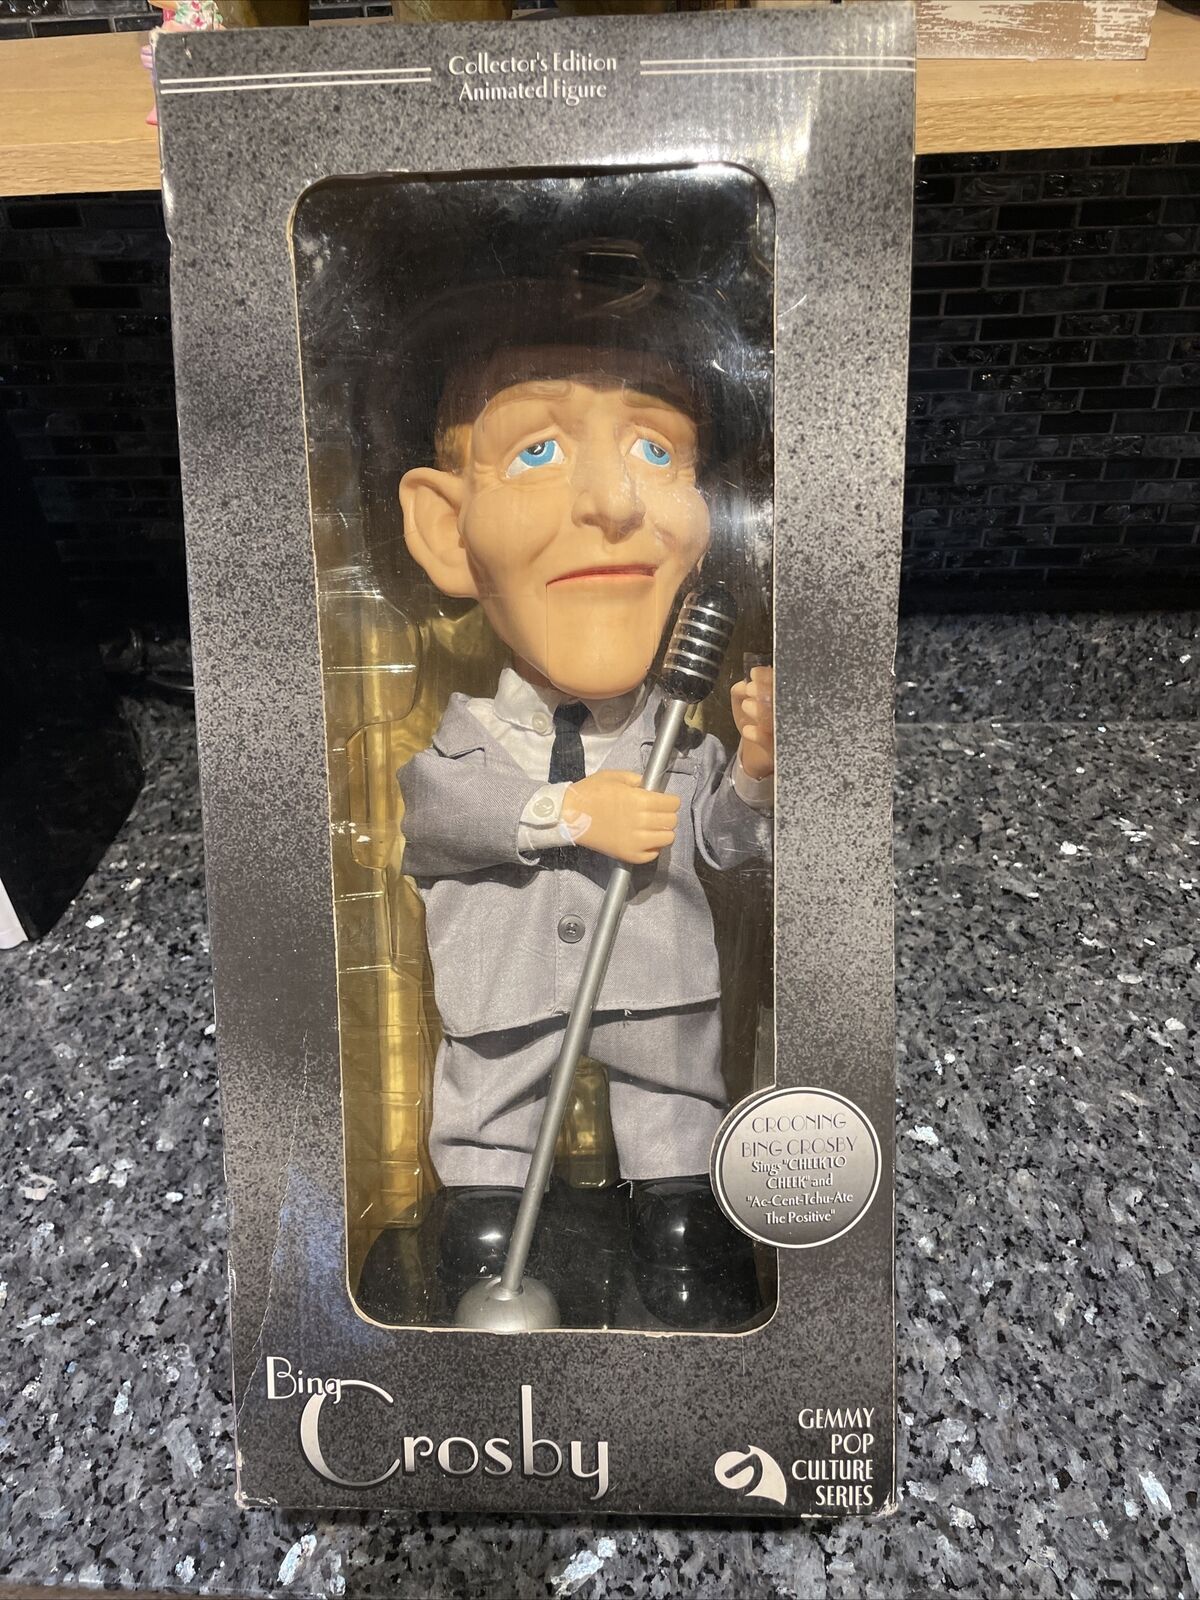 2002 Gemmy Singing Bing Crosby Animated Figure And Box READ Mouth Not Moving